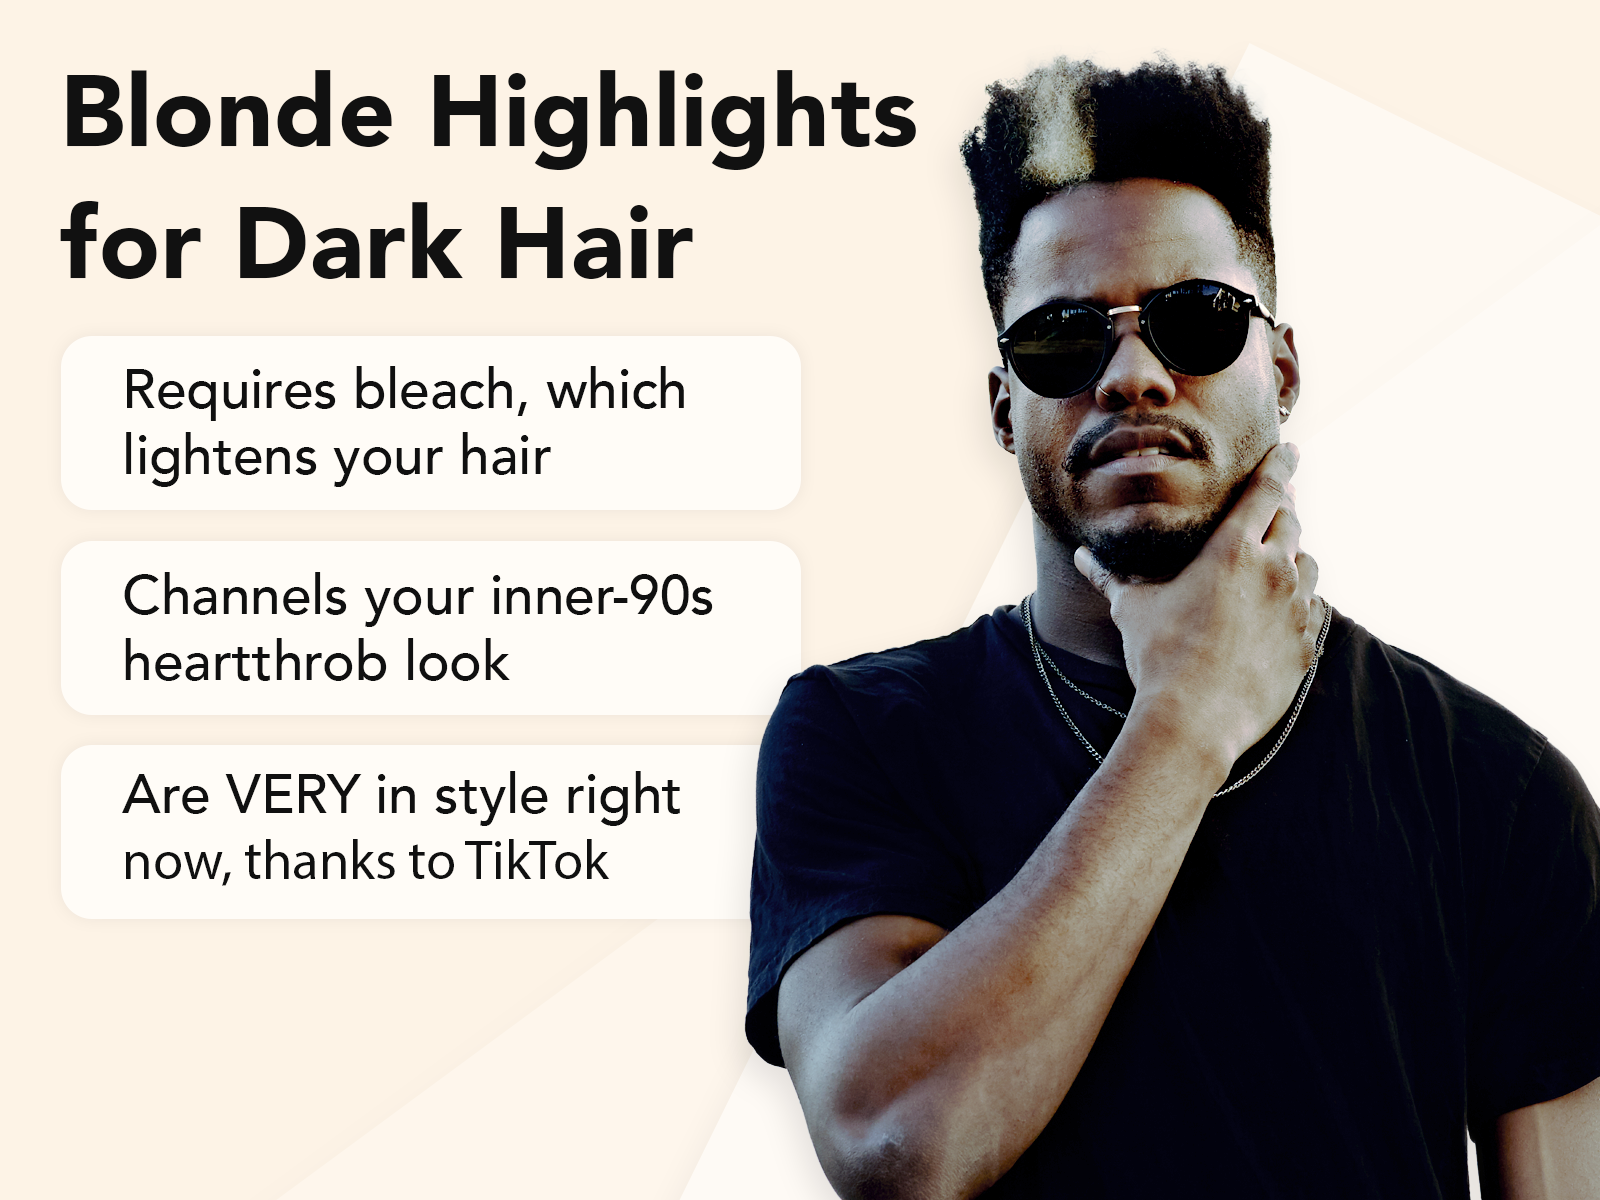 3. "How to Maintain Hot Blonde Hair for Men: Tips and Tricks" - wide 4